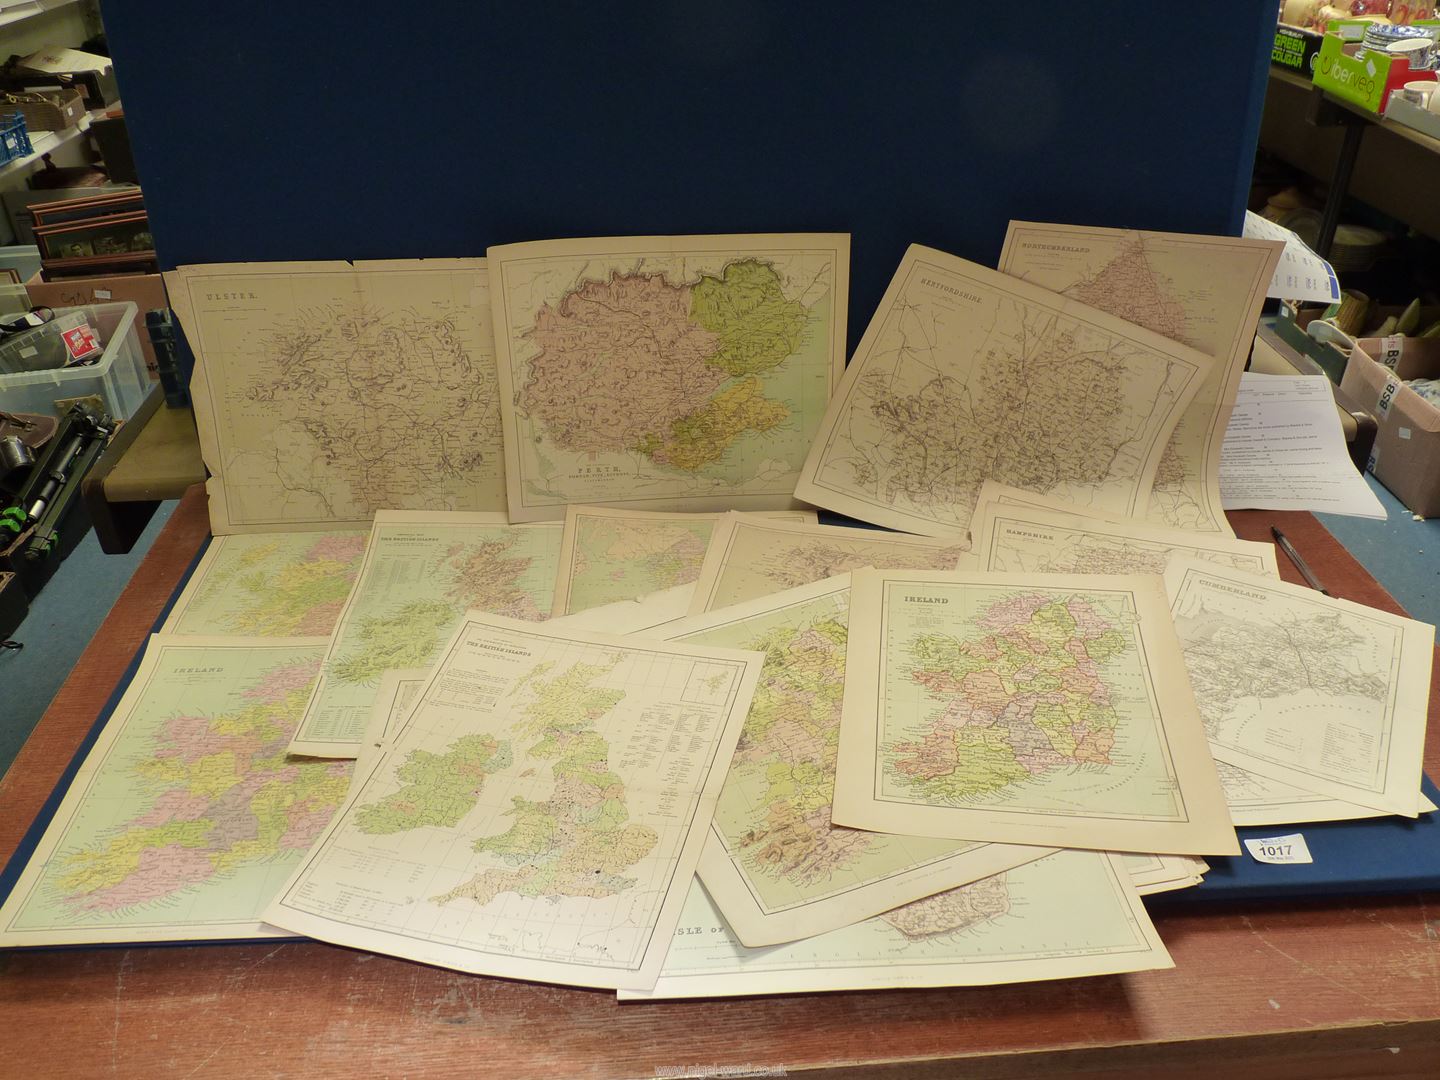 A quantity of loose maps of the British Isles some taken from books including Ireland, Wales,